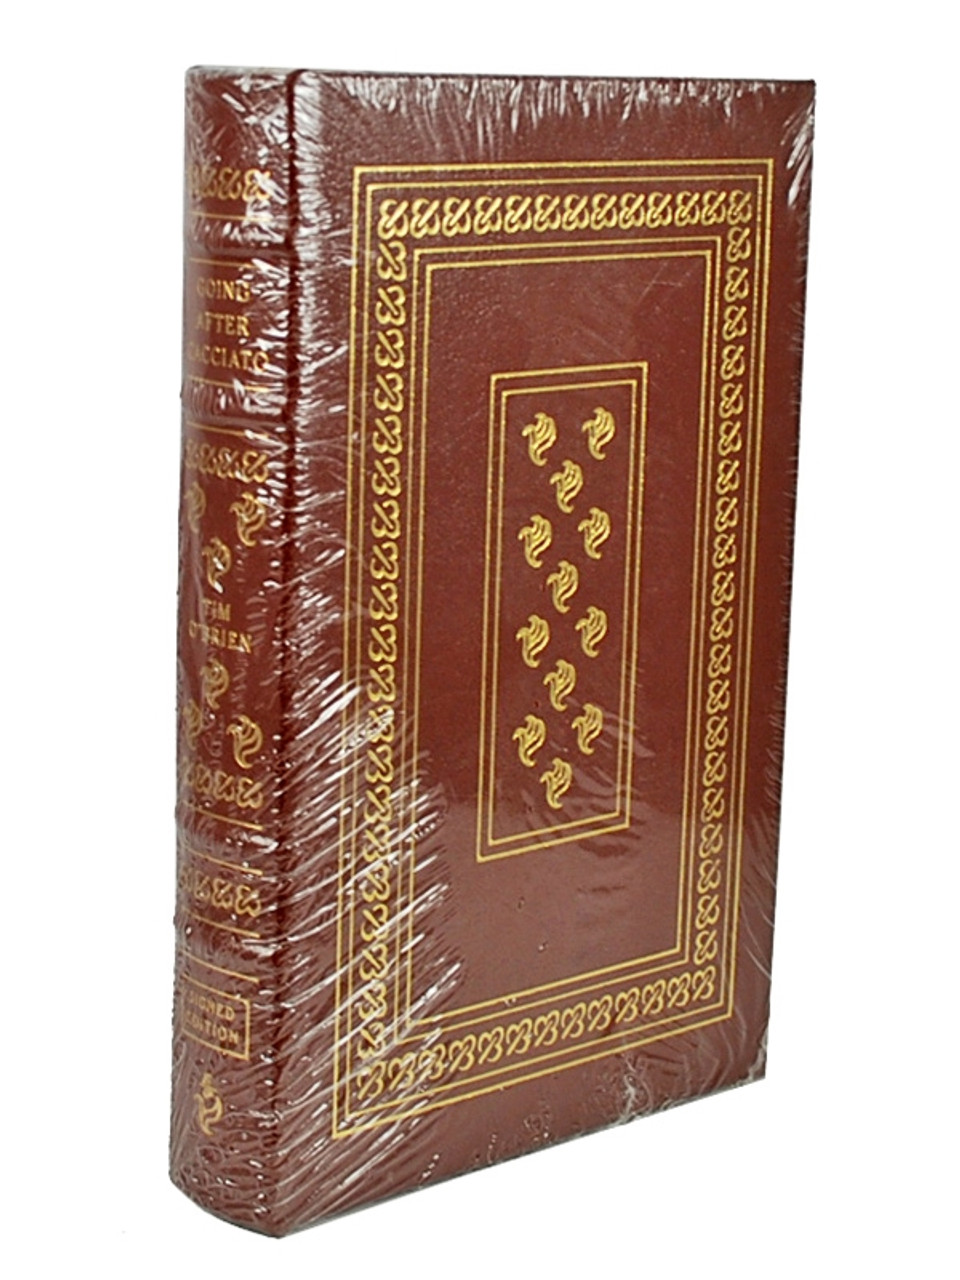 Easton Press, Tim O'Brien "Going After Cacciato", Signed Limited Edition